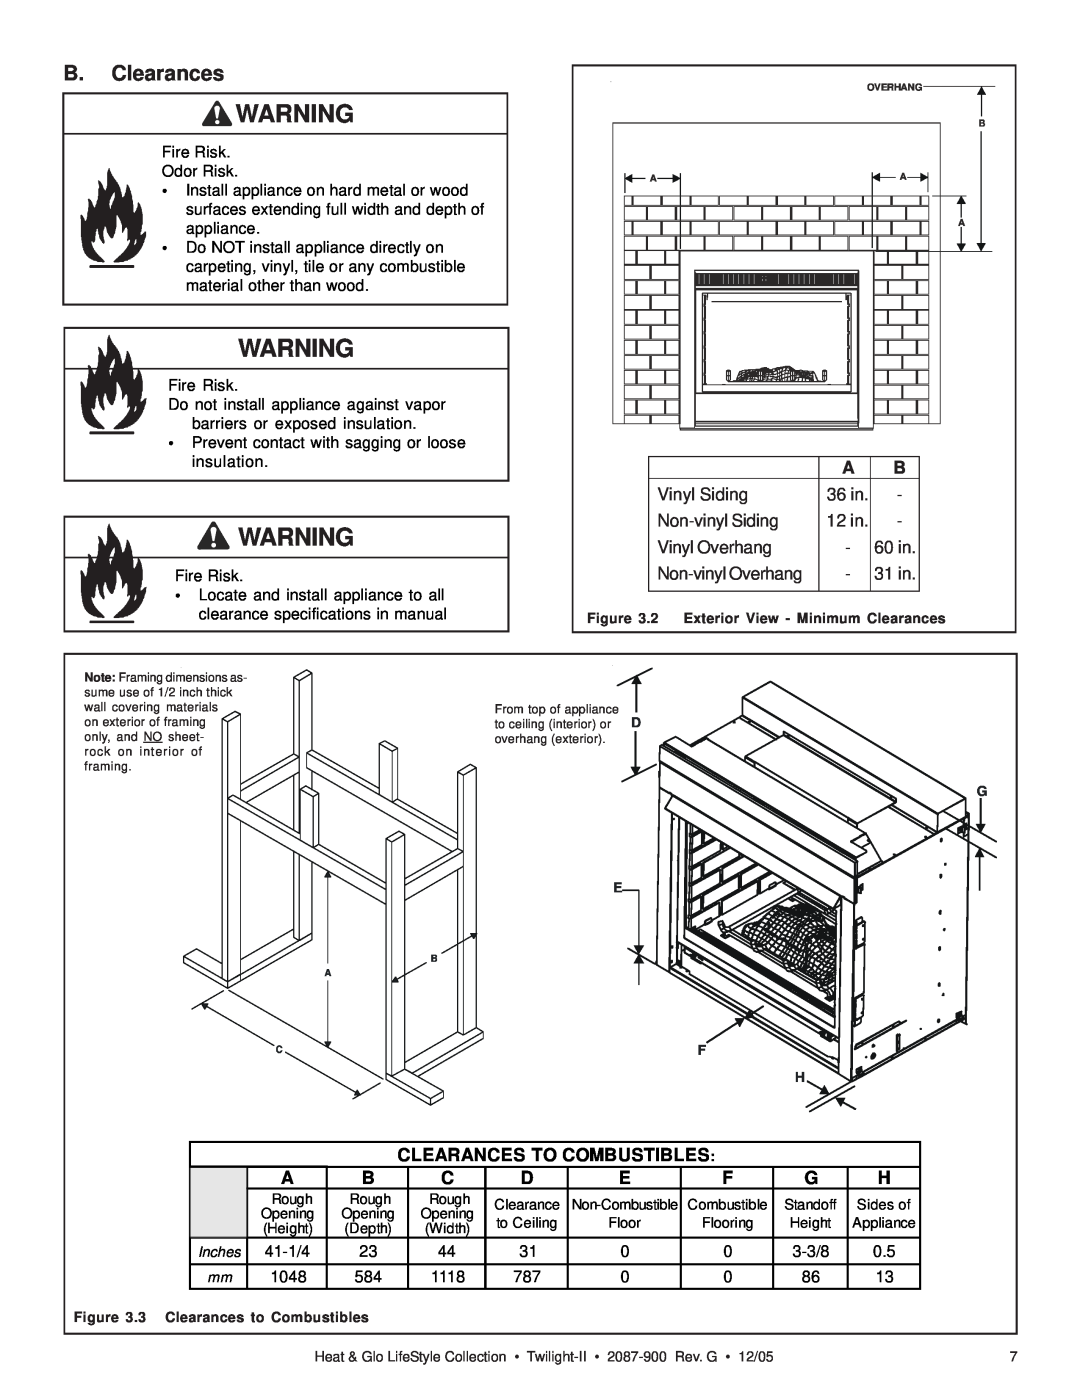 Heat & Glo LifeStyle TWILIGHT-II owner manual B.Clearances, Clearances To Combustibles, 36 in 